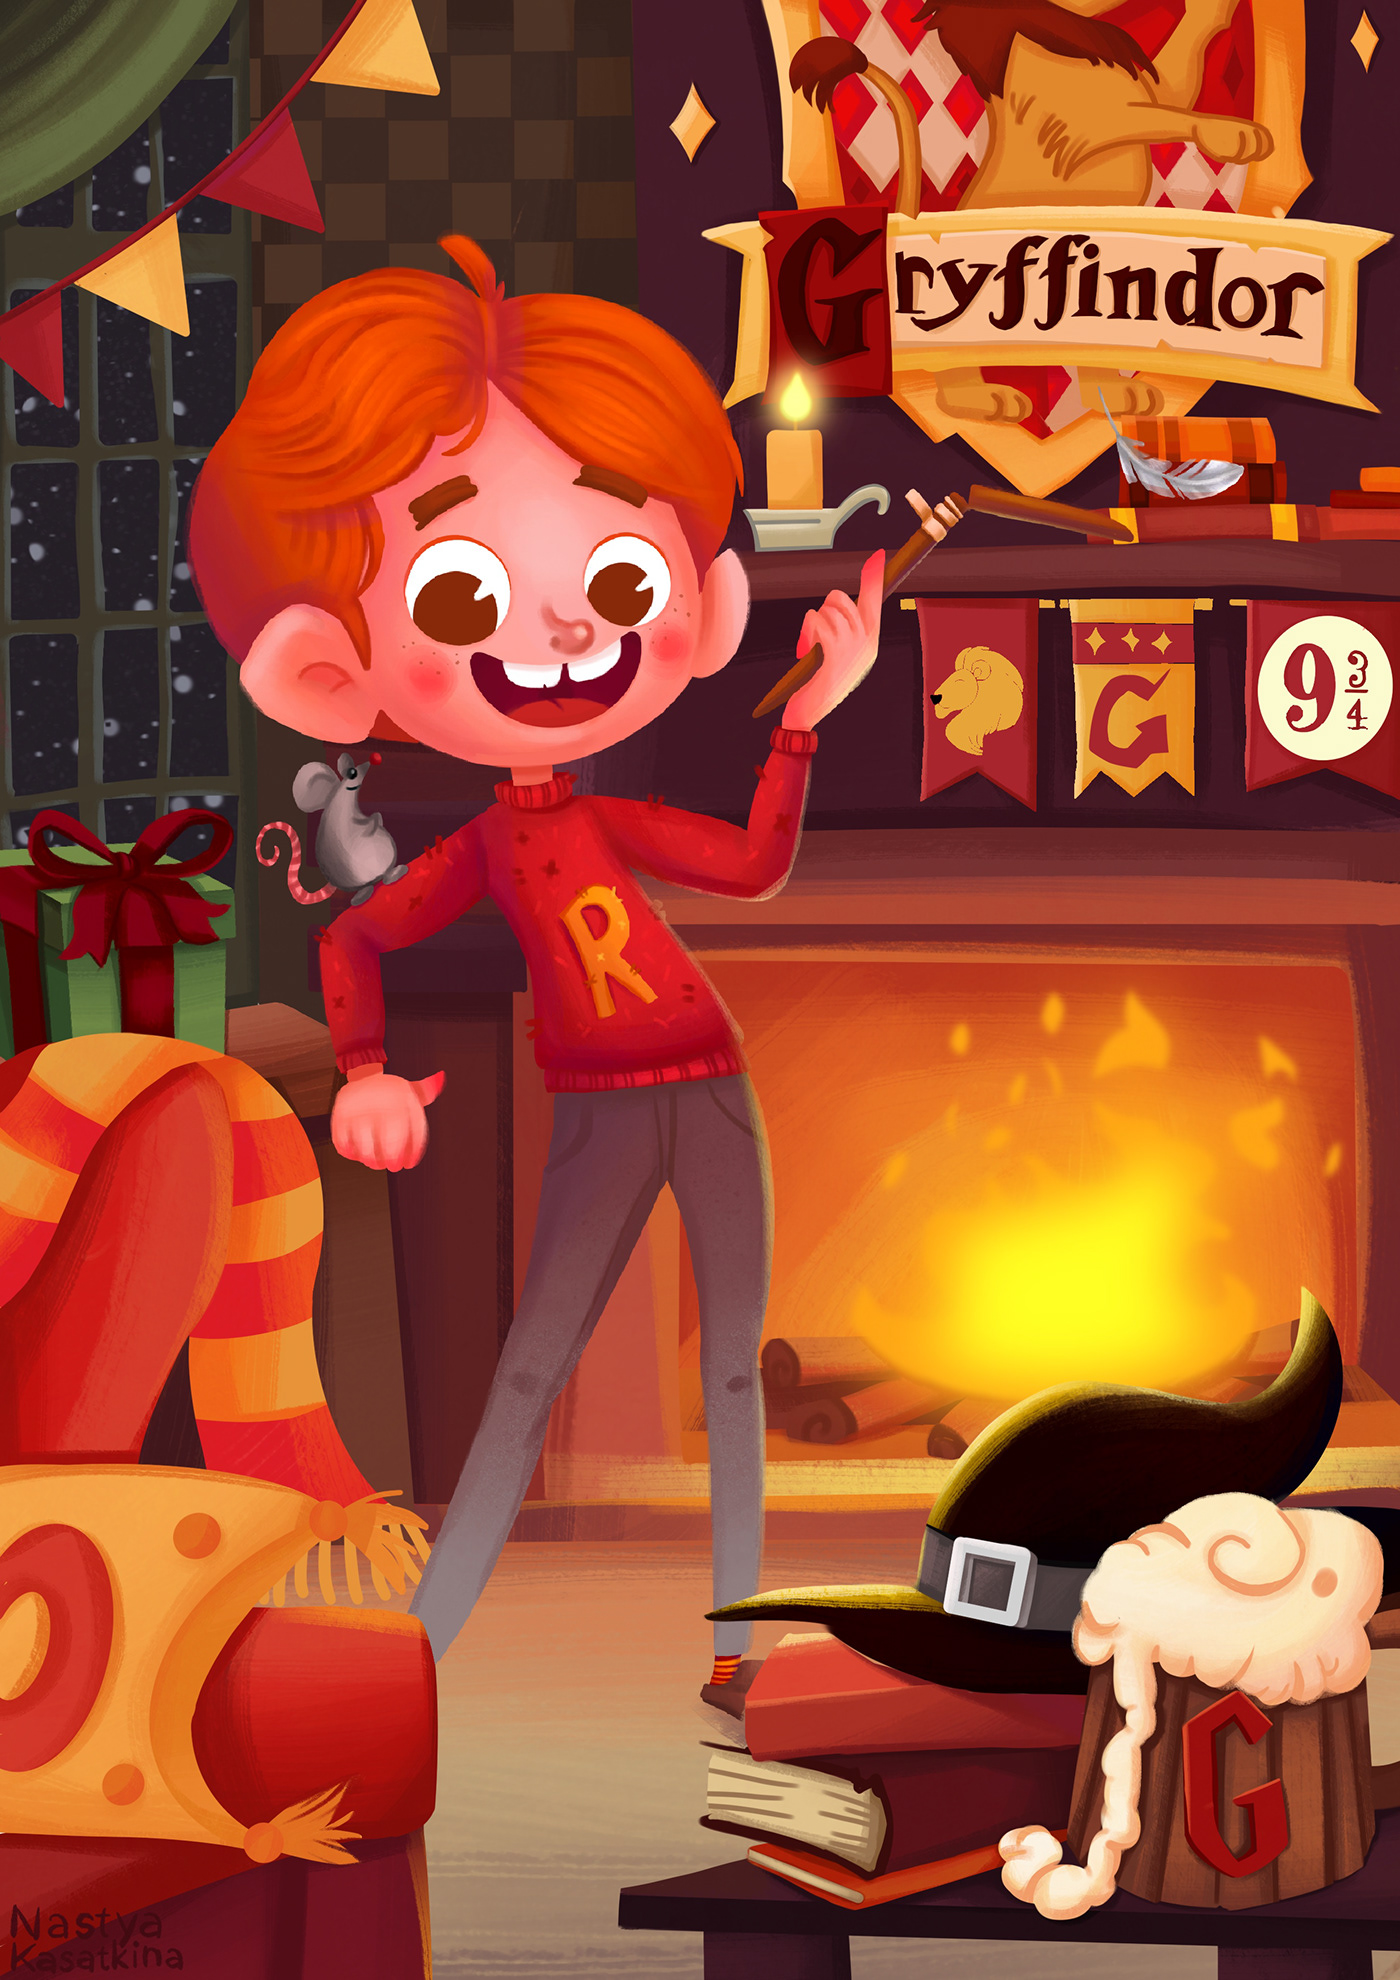 Ron Weasley is bright and cheerful. I drew it in the Gryffindor common room 
next to the fireplace.